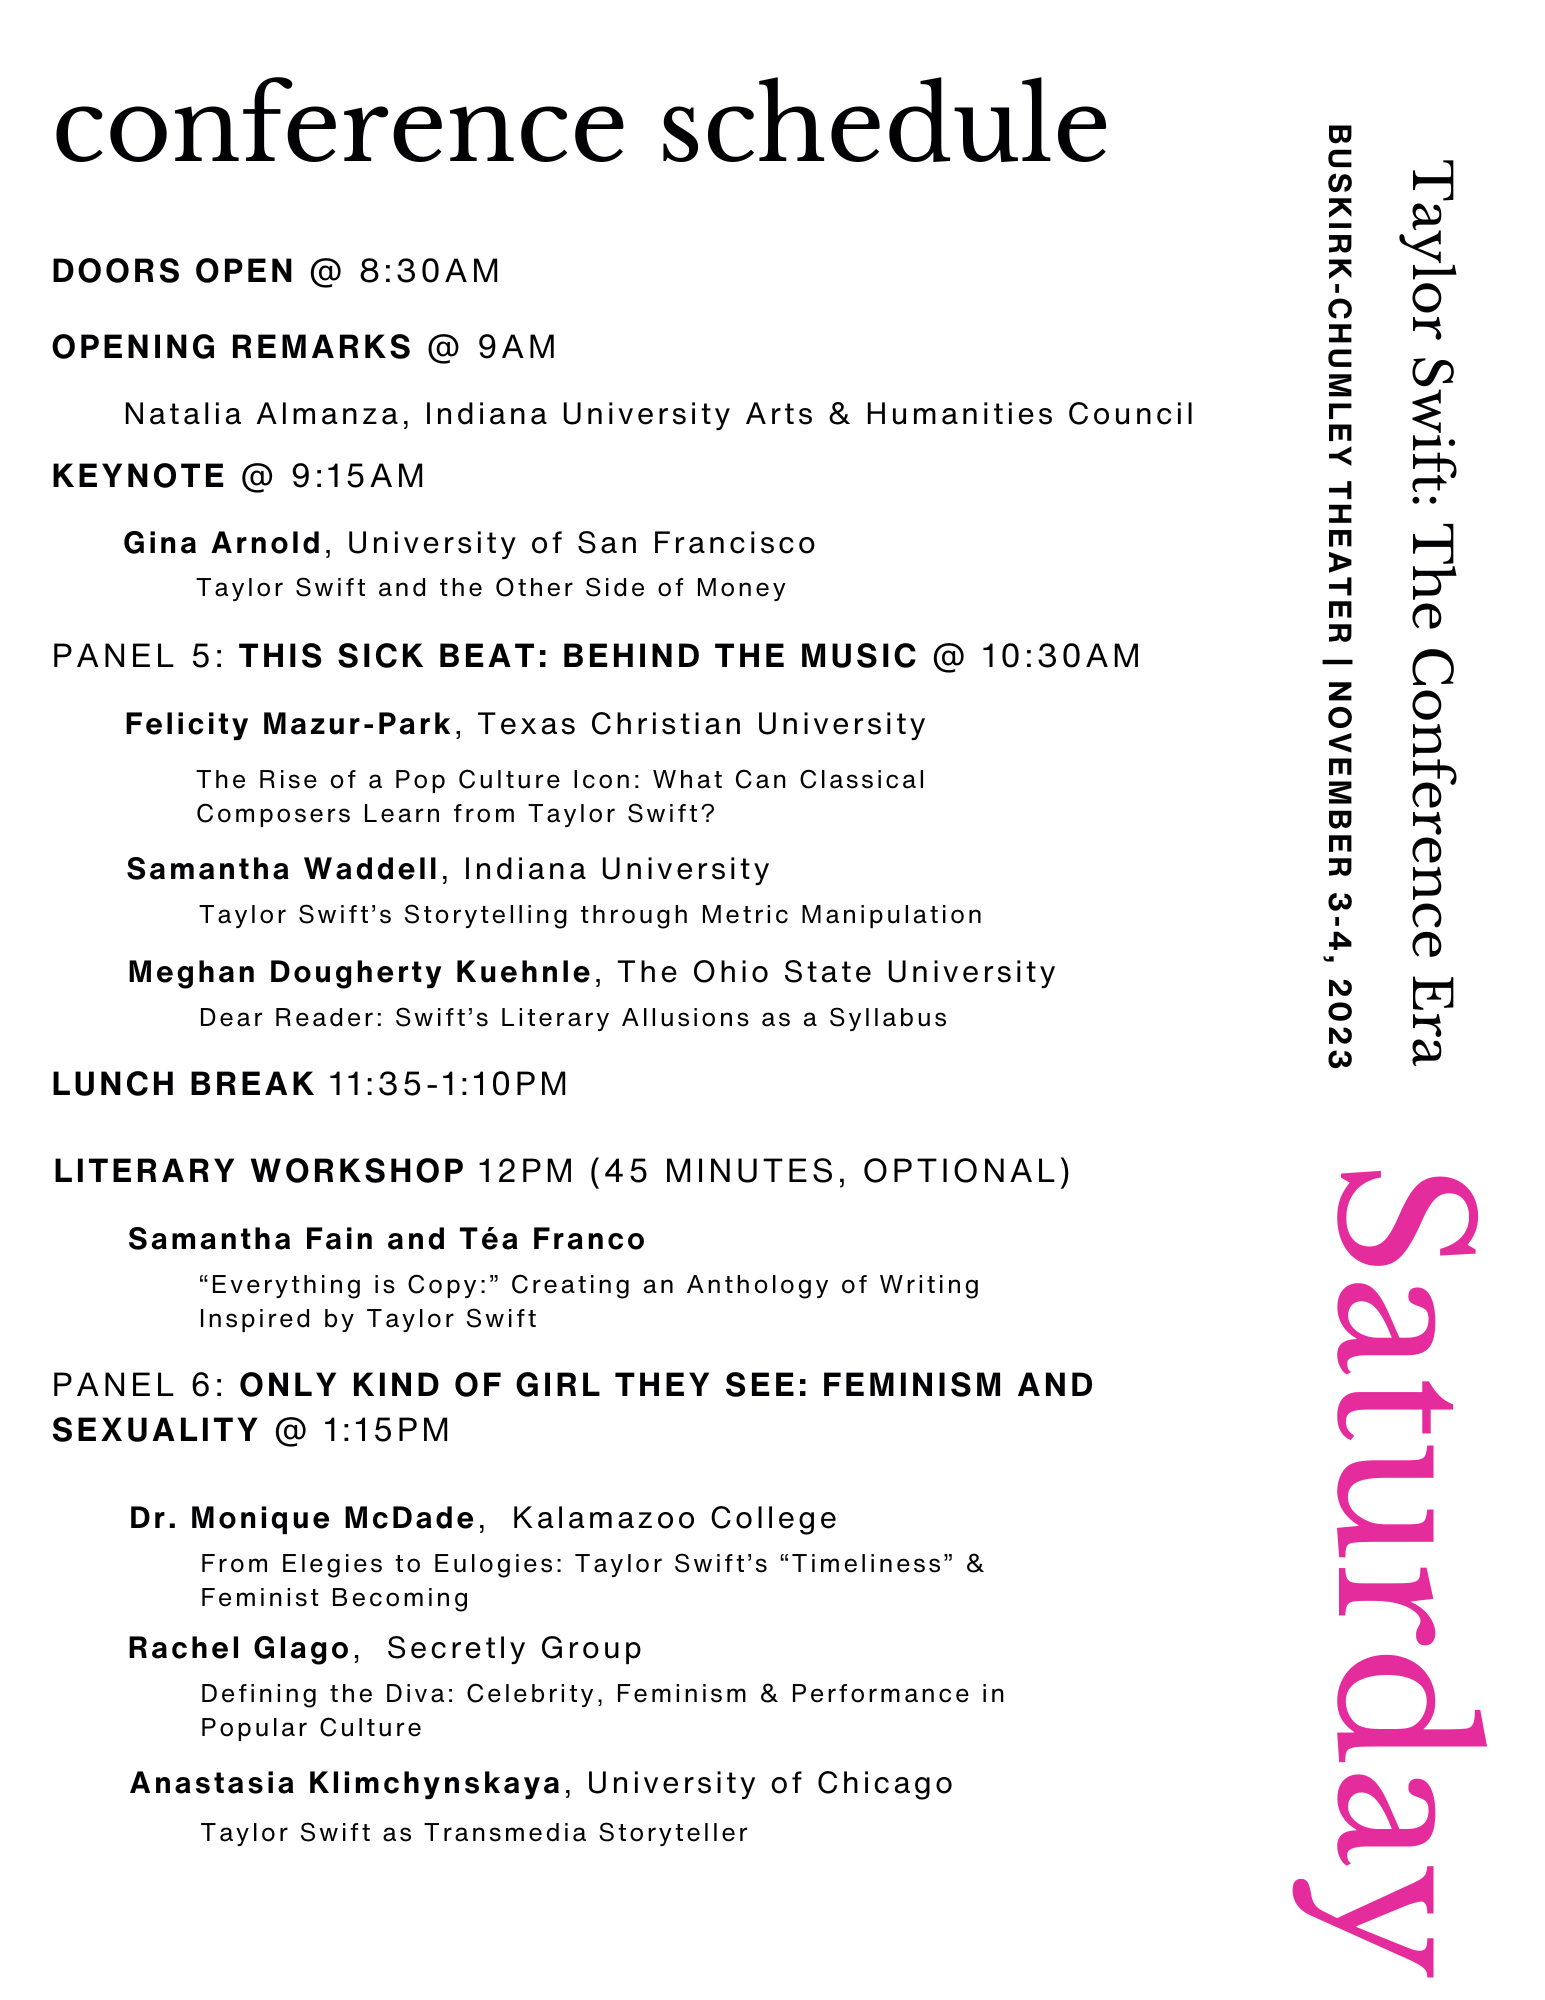 Taylor Swift Conference Council Programs Arts & Humanities Council